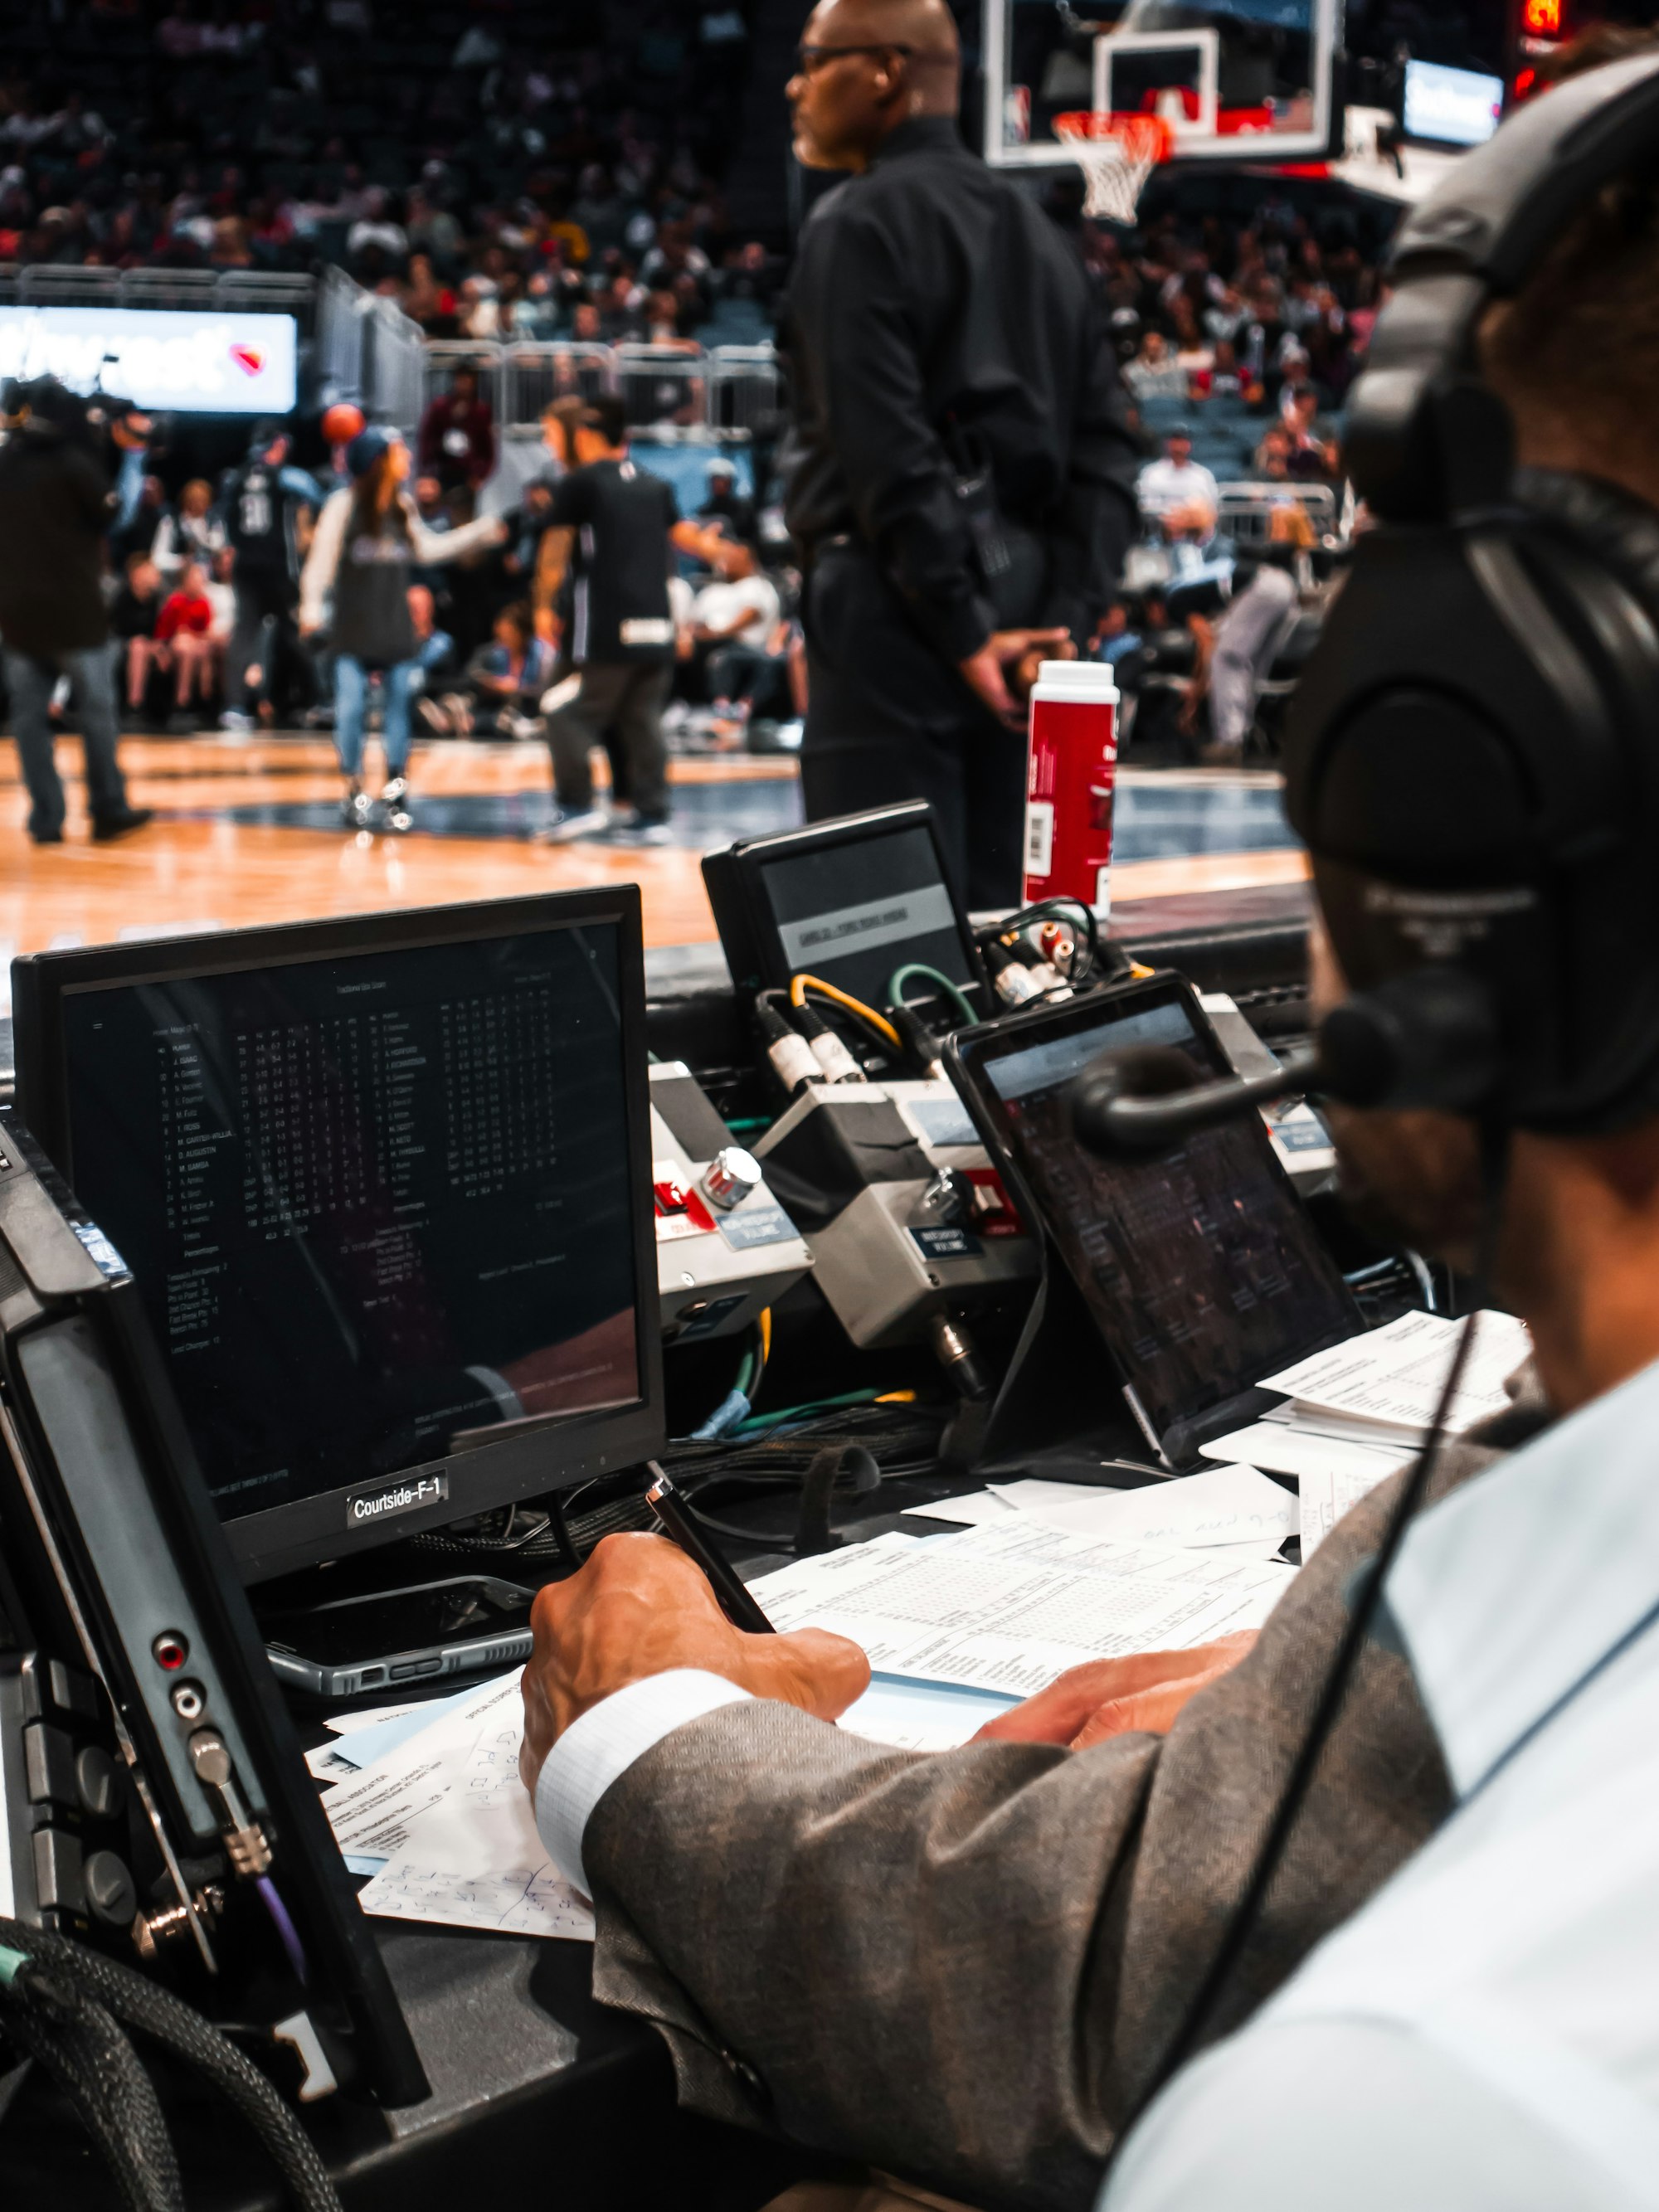 Want to know how to grow top tech talent? Take lessons from the NBA